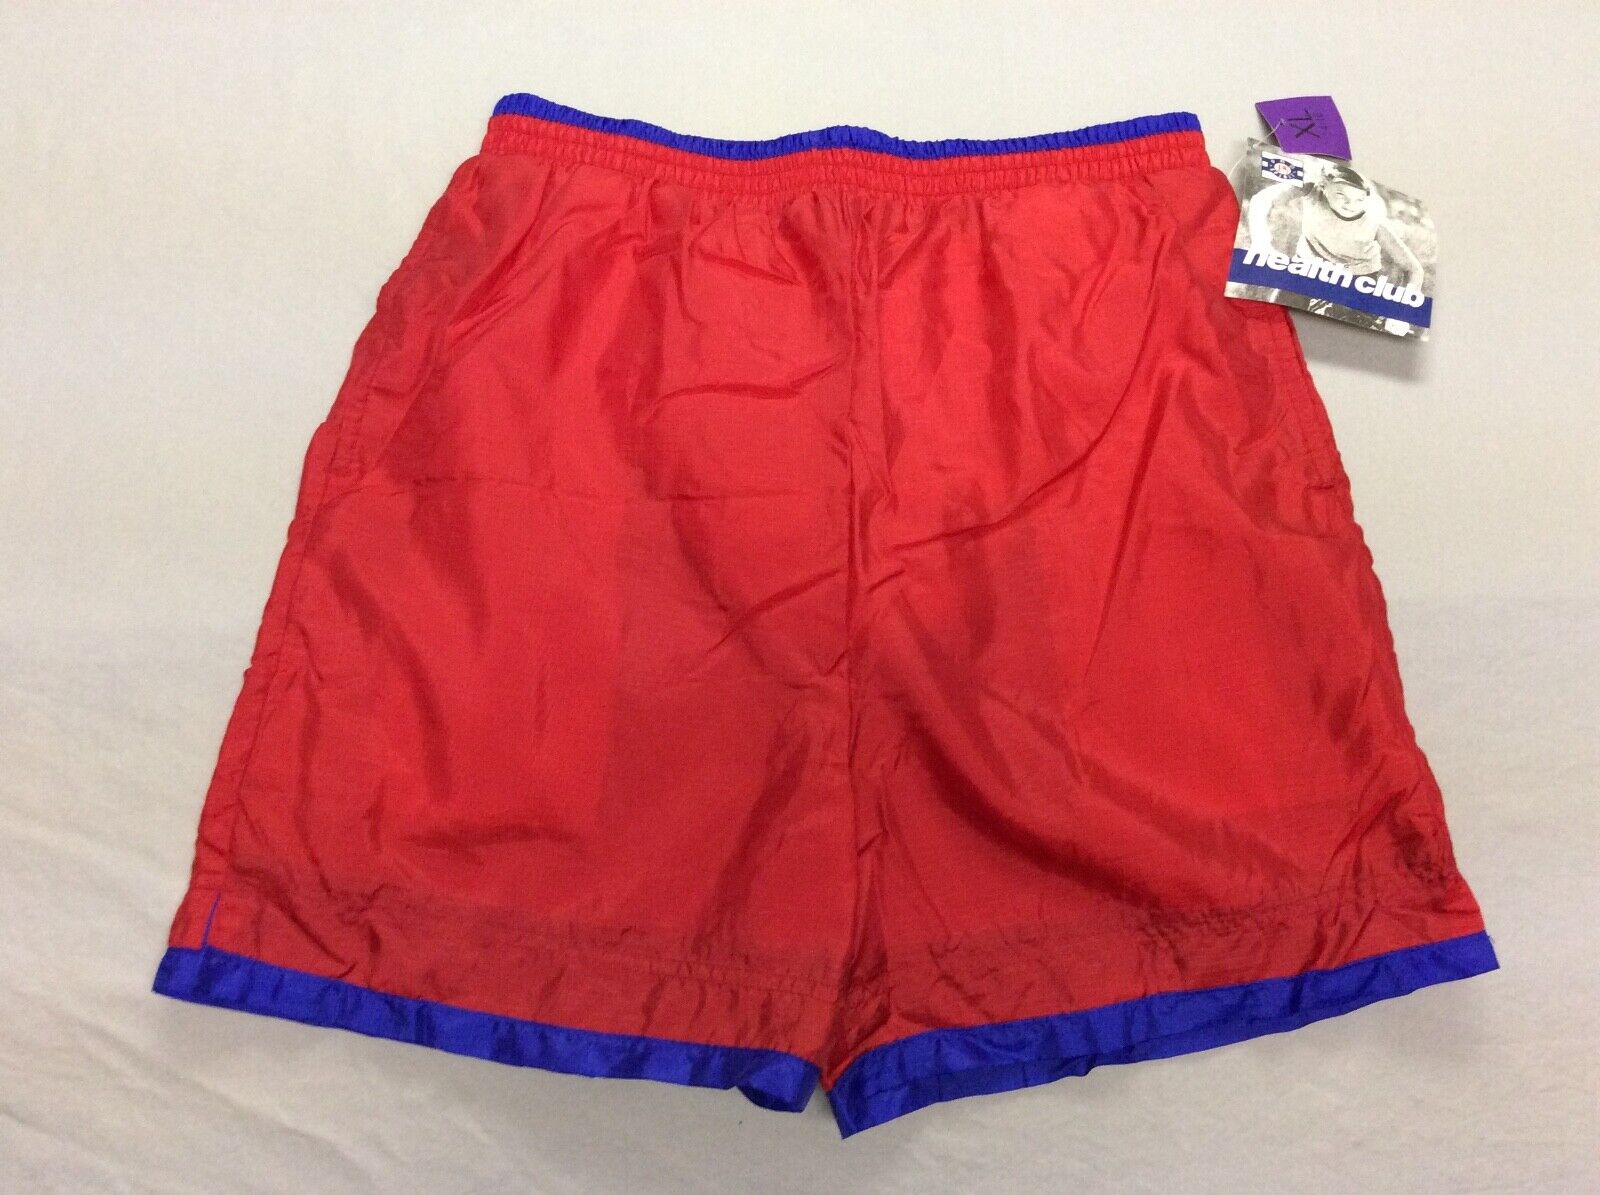 Vintage 90s Pro Spirit Red And Blue Nylon Athletic Soccer Shorts Youth Xl New!